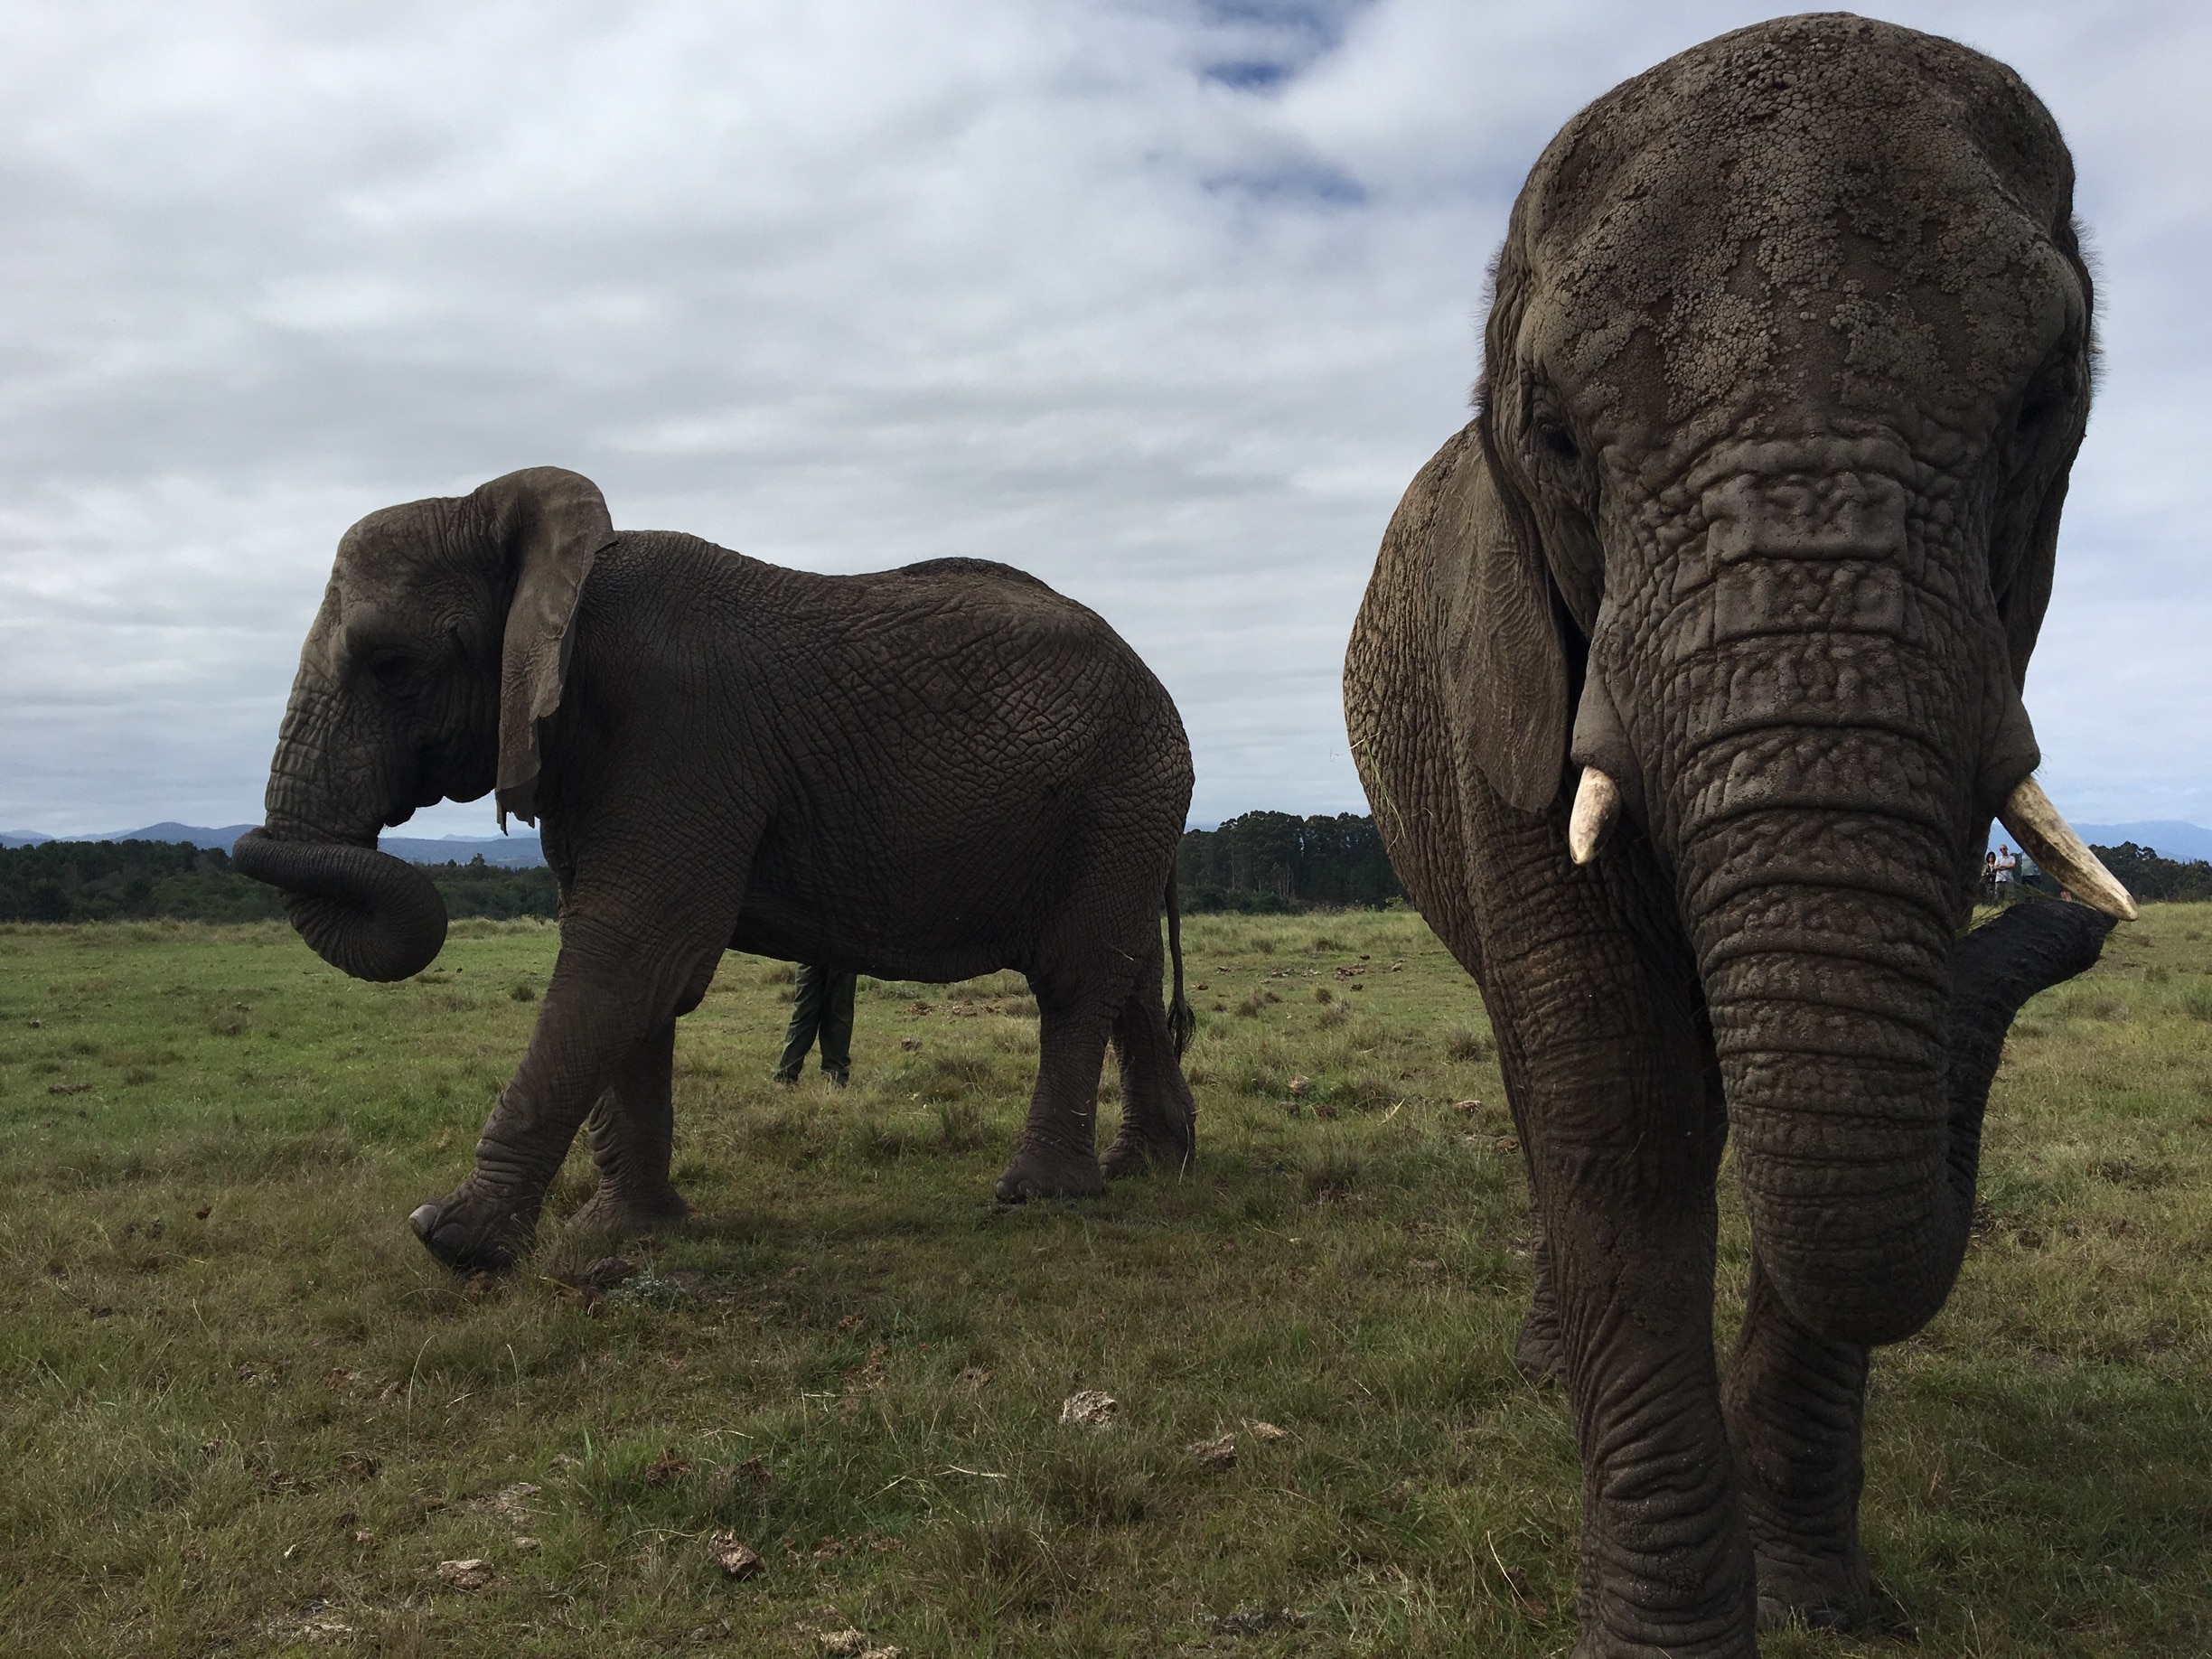 We toured a great elephant rescue center in Knysna, South Africa. These elephants are able to roam around their park relatively freely. They've been rescued from elephant culls and abusive situations.